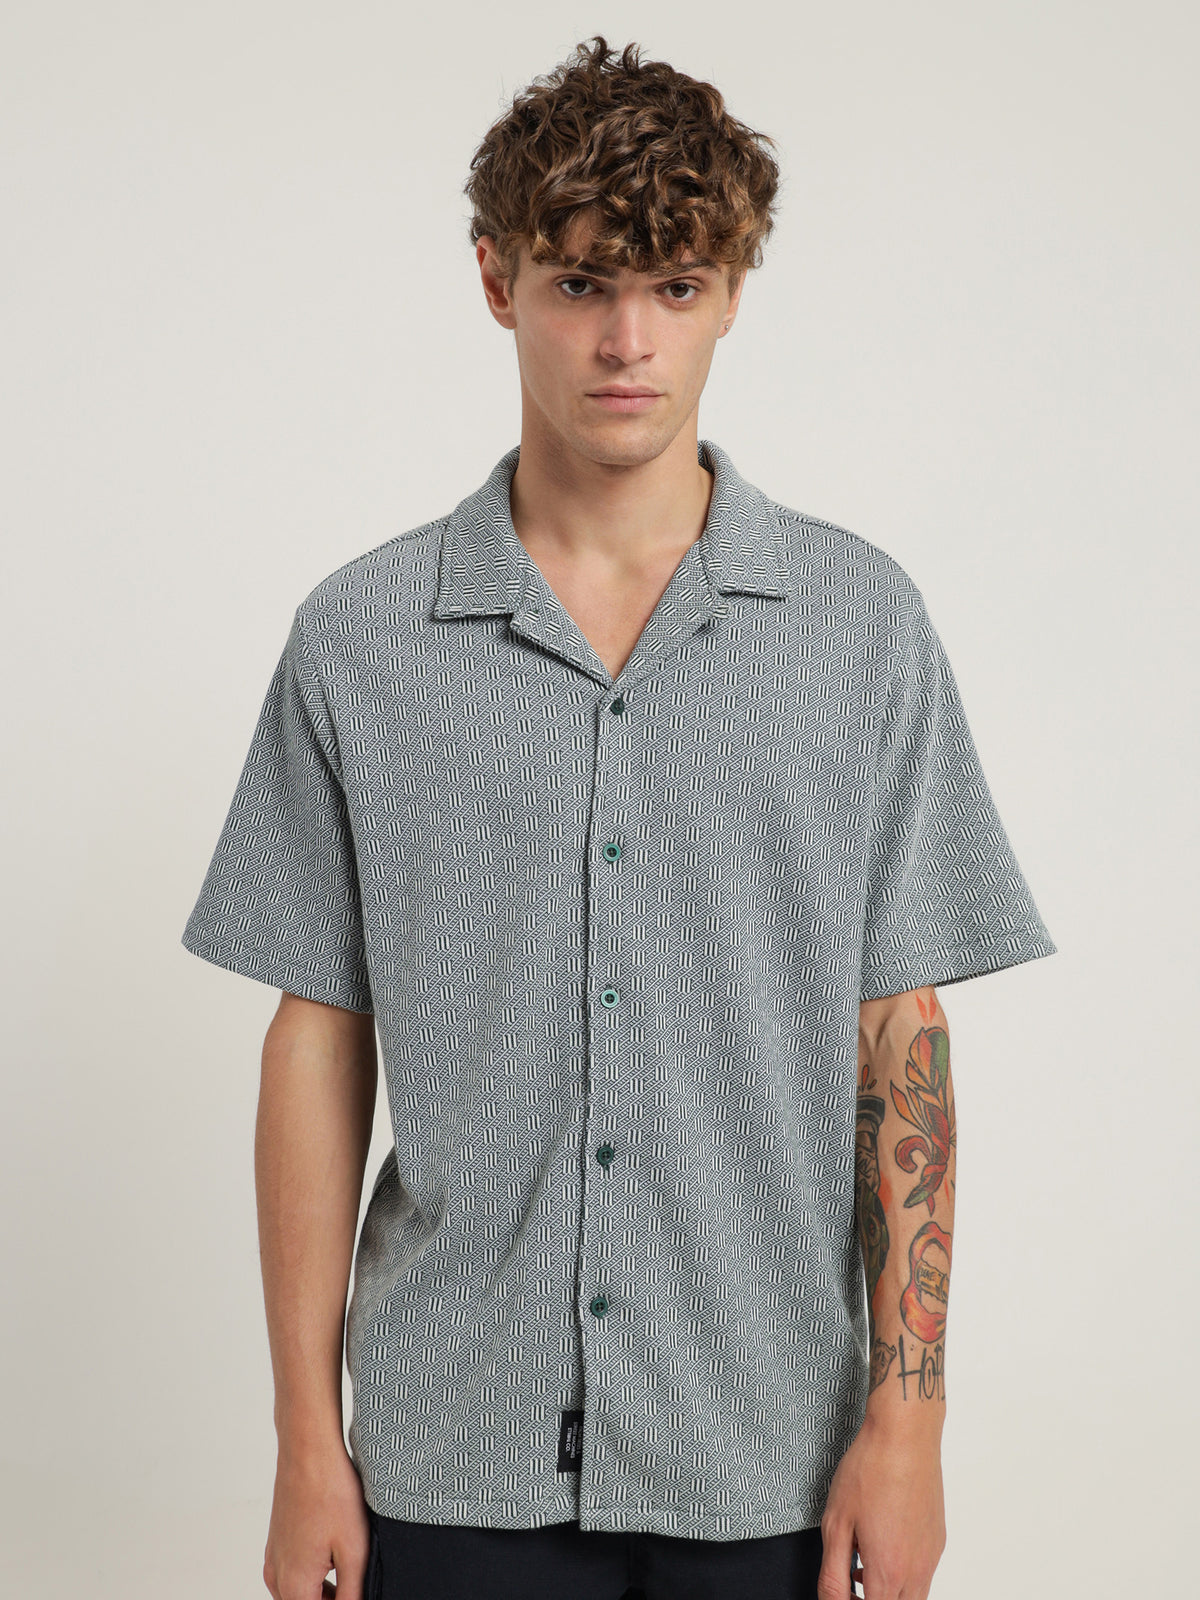 Ease Bowling Shirt in Teal